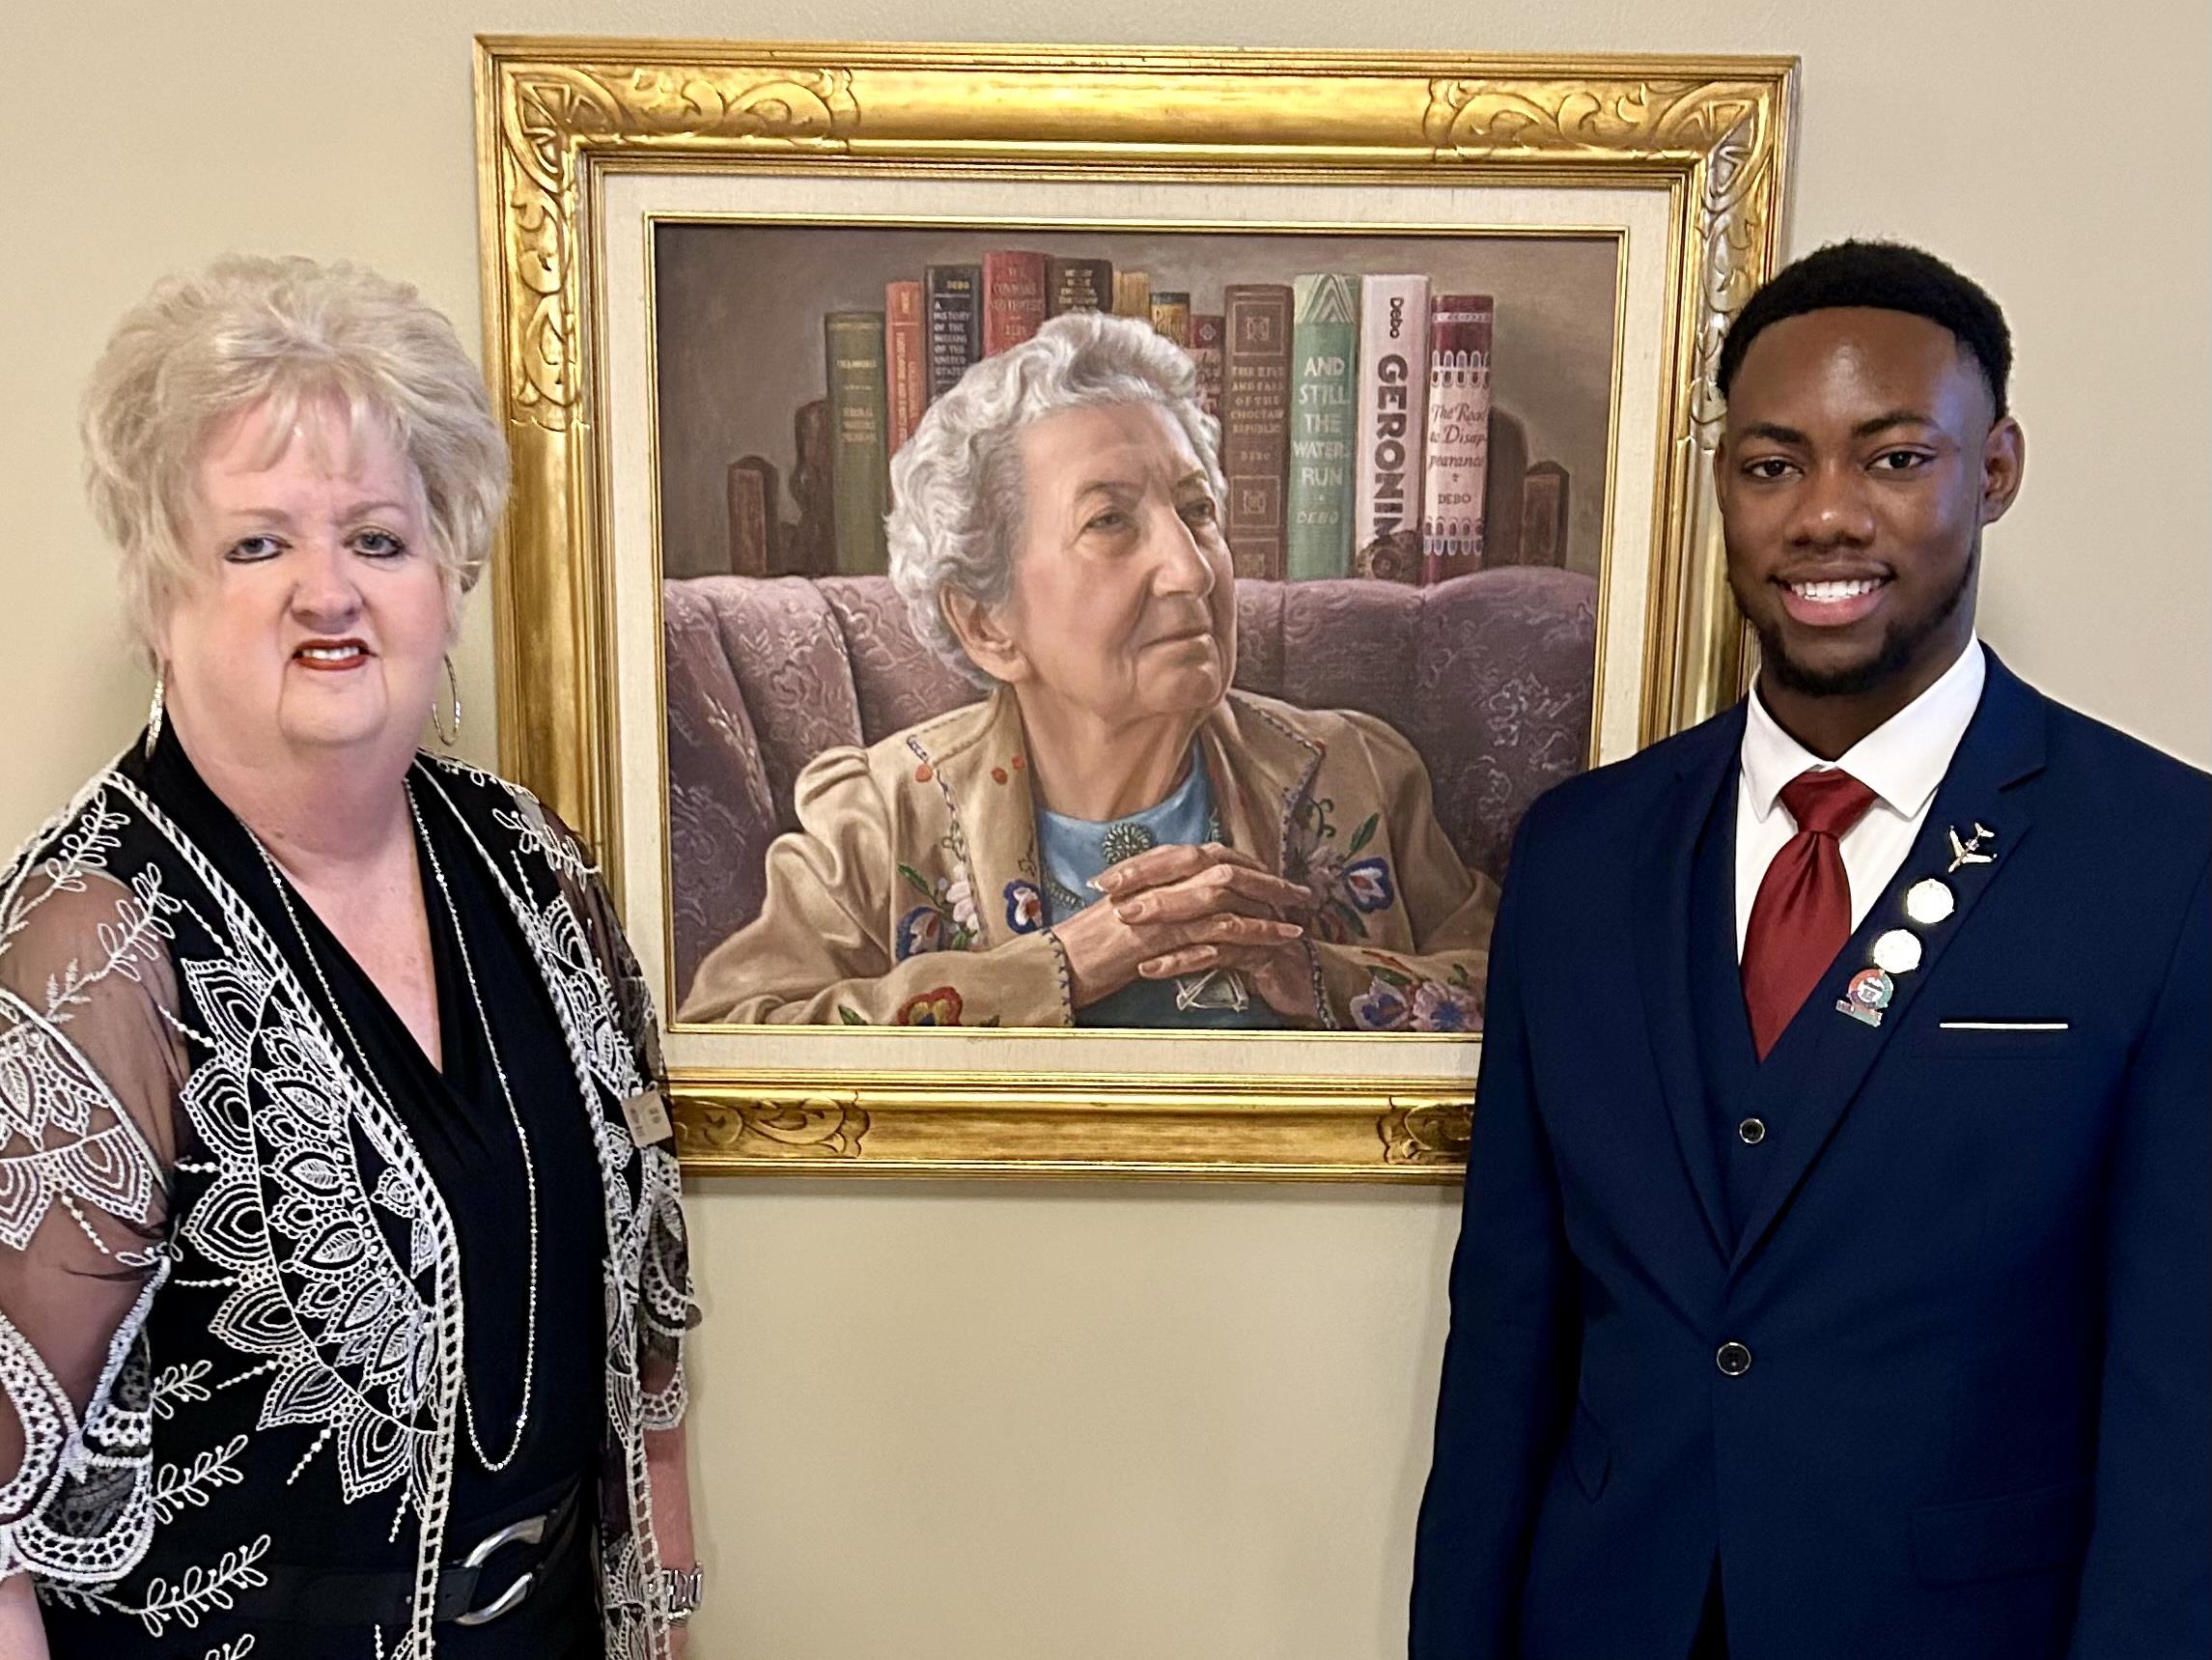 Paula Kedy and Tarique Lyons pose in front of a portrait at the Oklahoma State Capitol